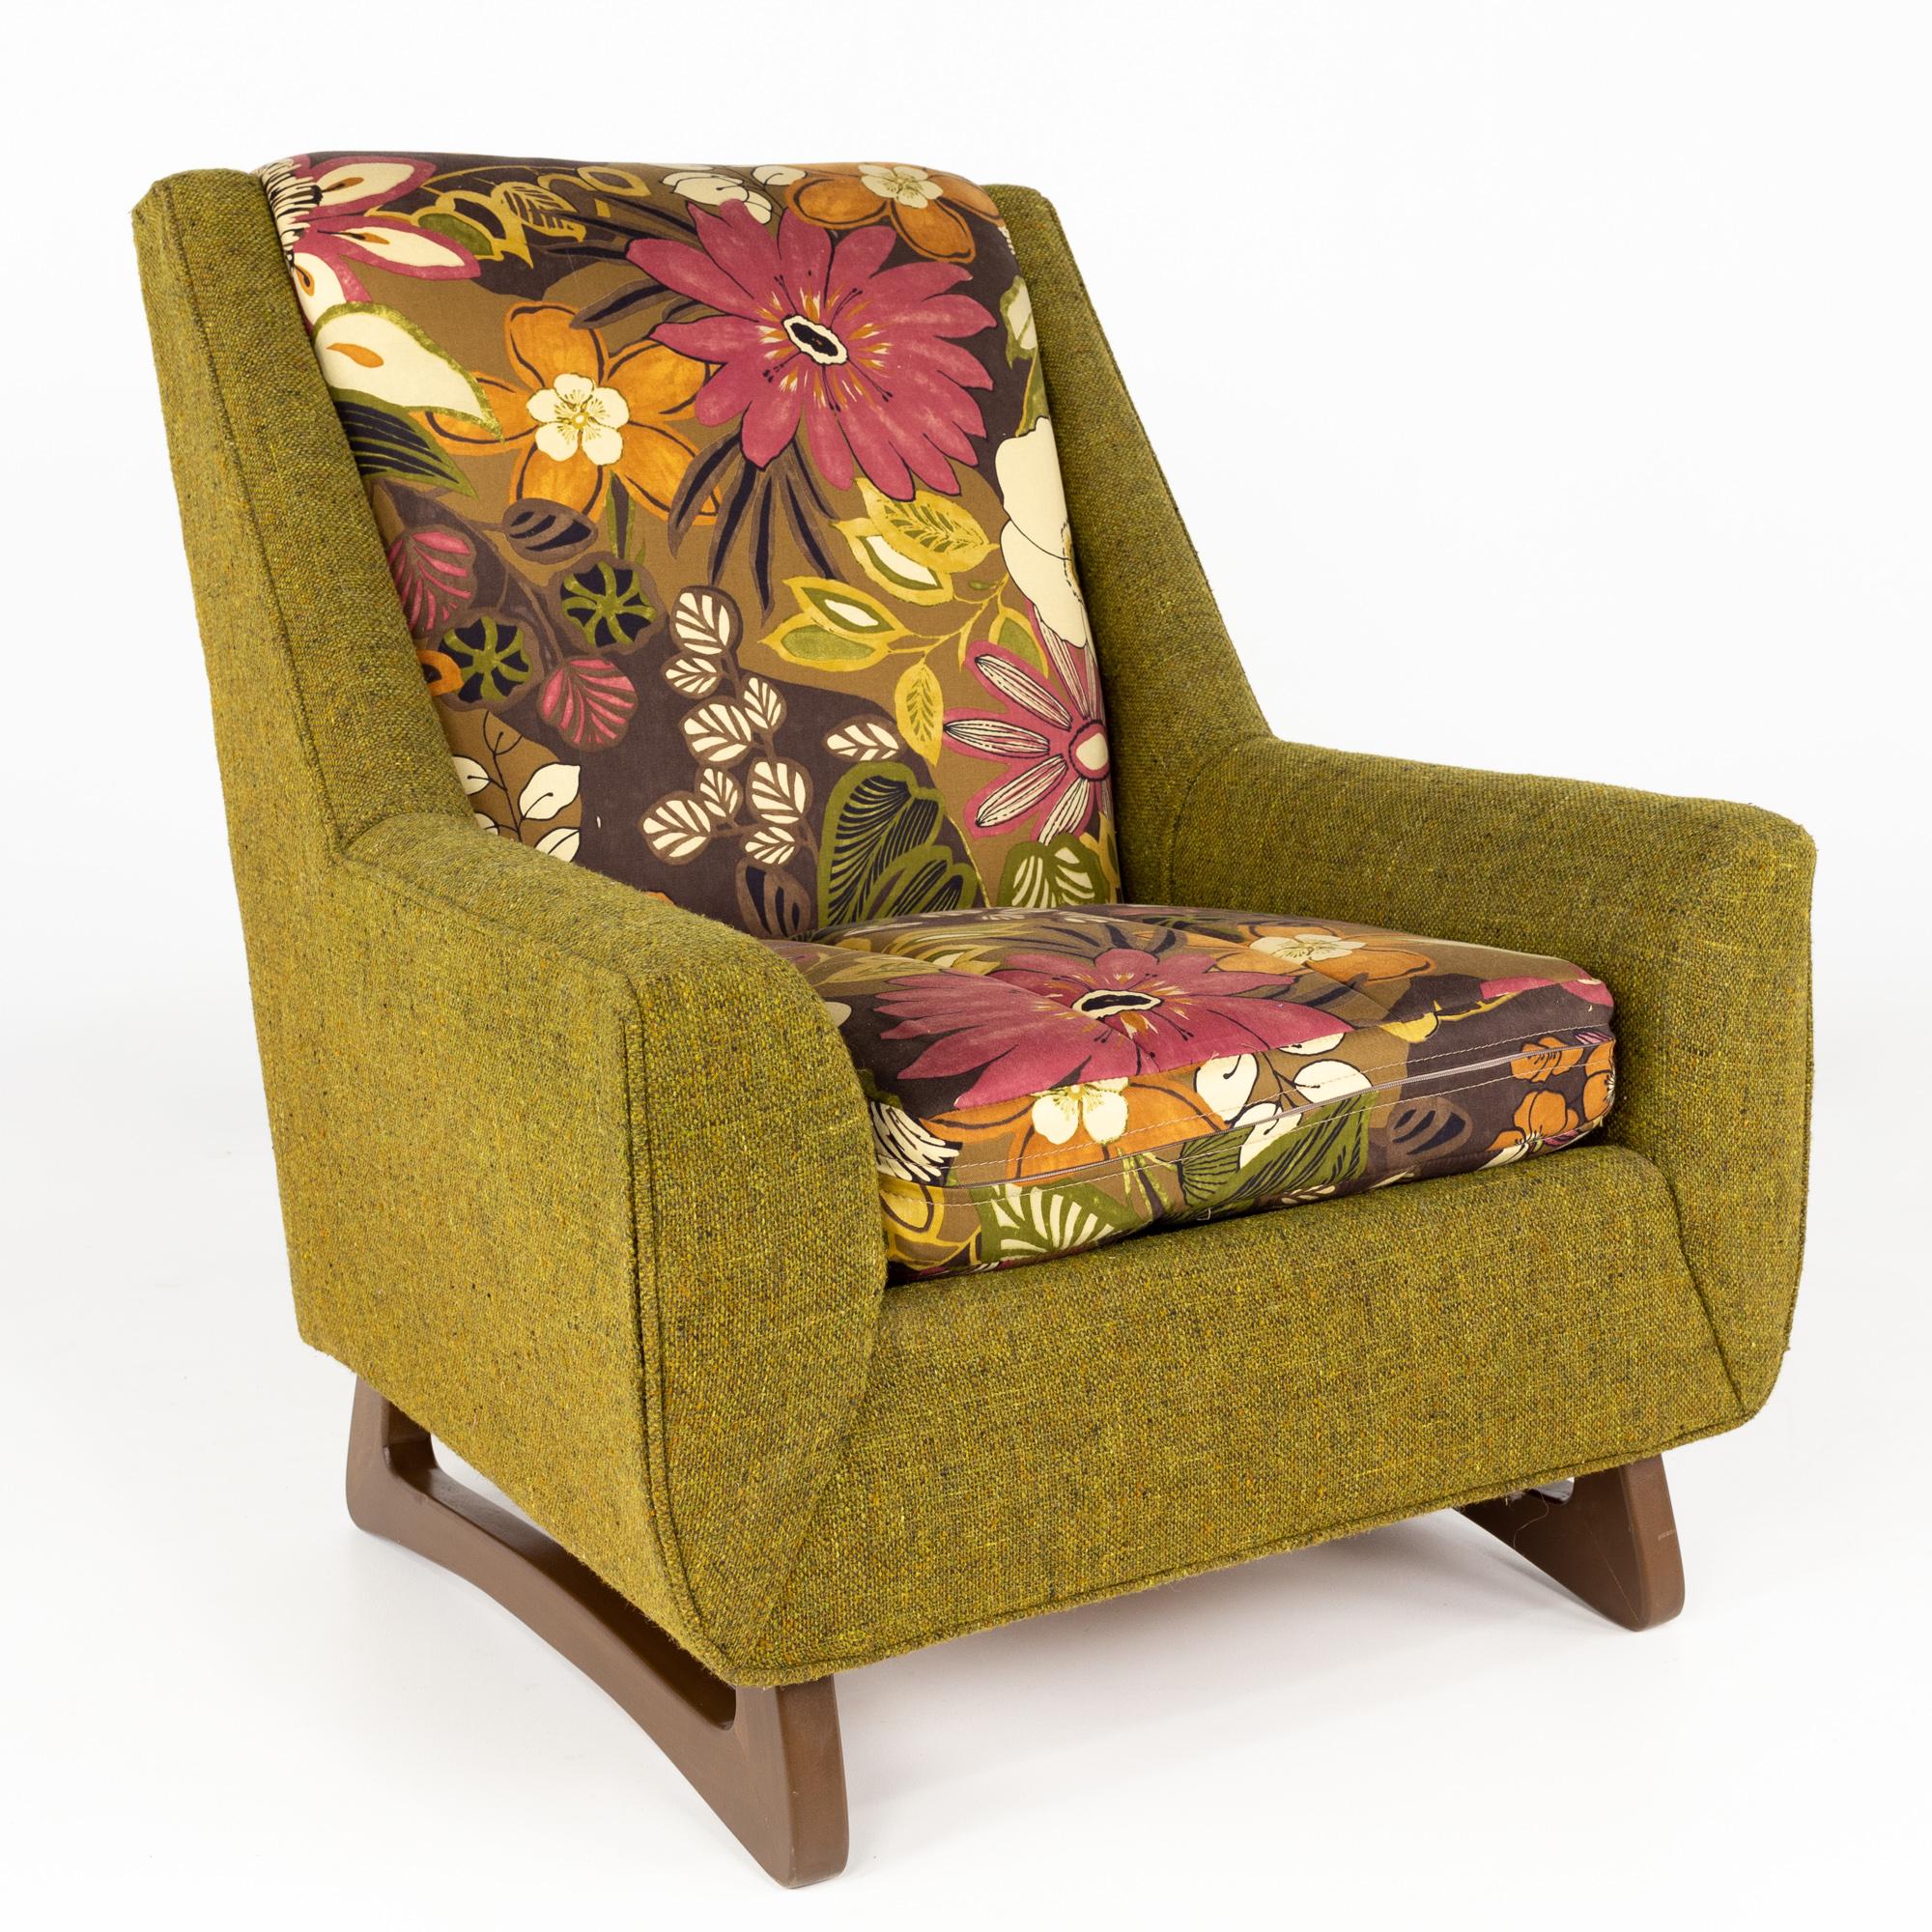 American Kroehler Adrian Pearsall Style Contemporary Armchair